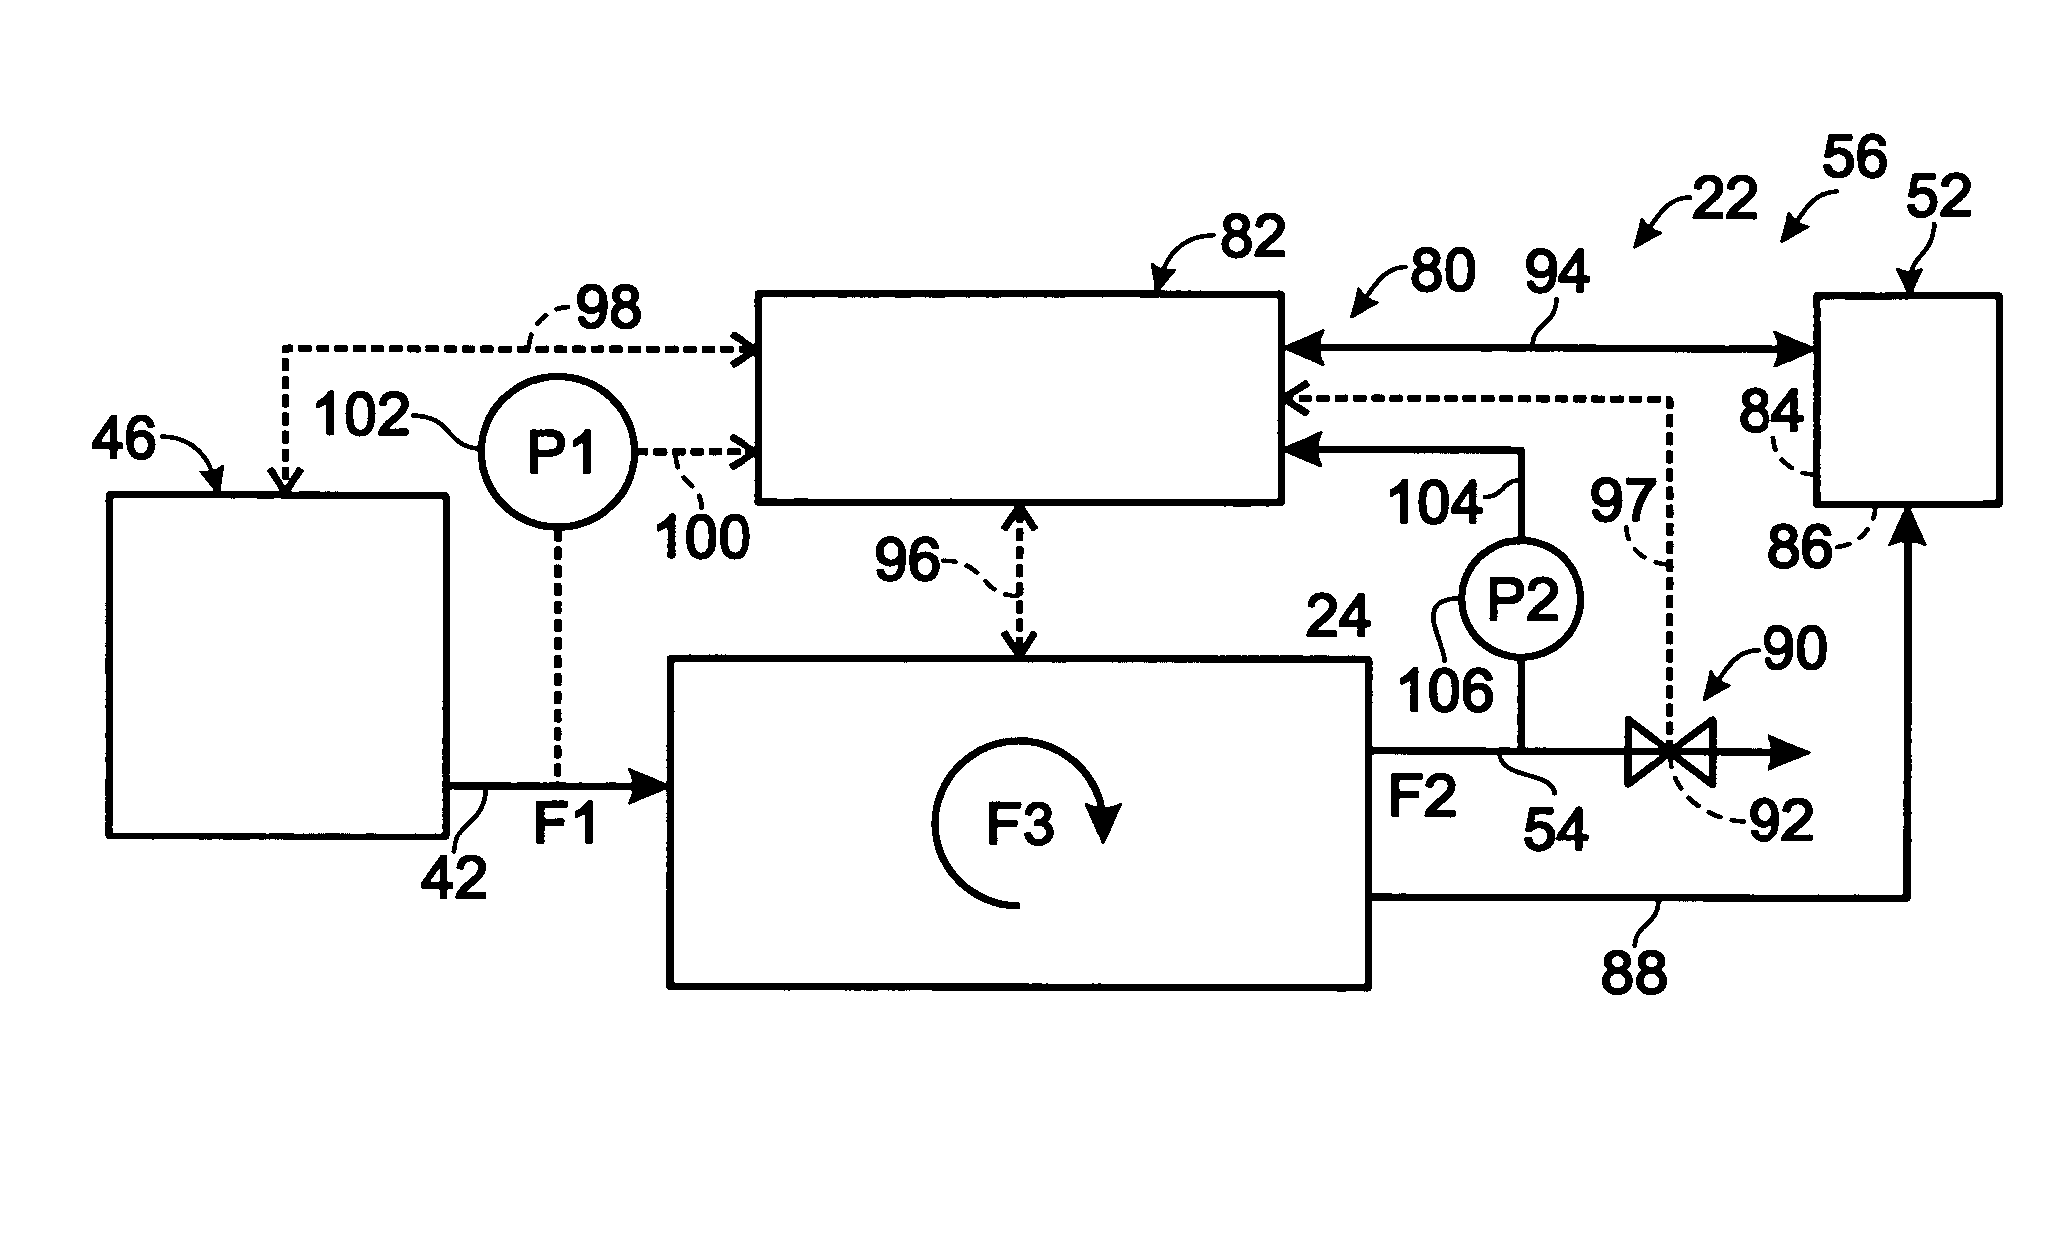 Utilization-based fuel cell monitoring and control